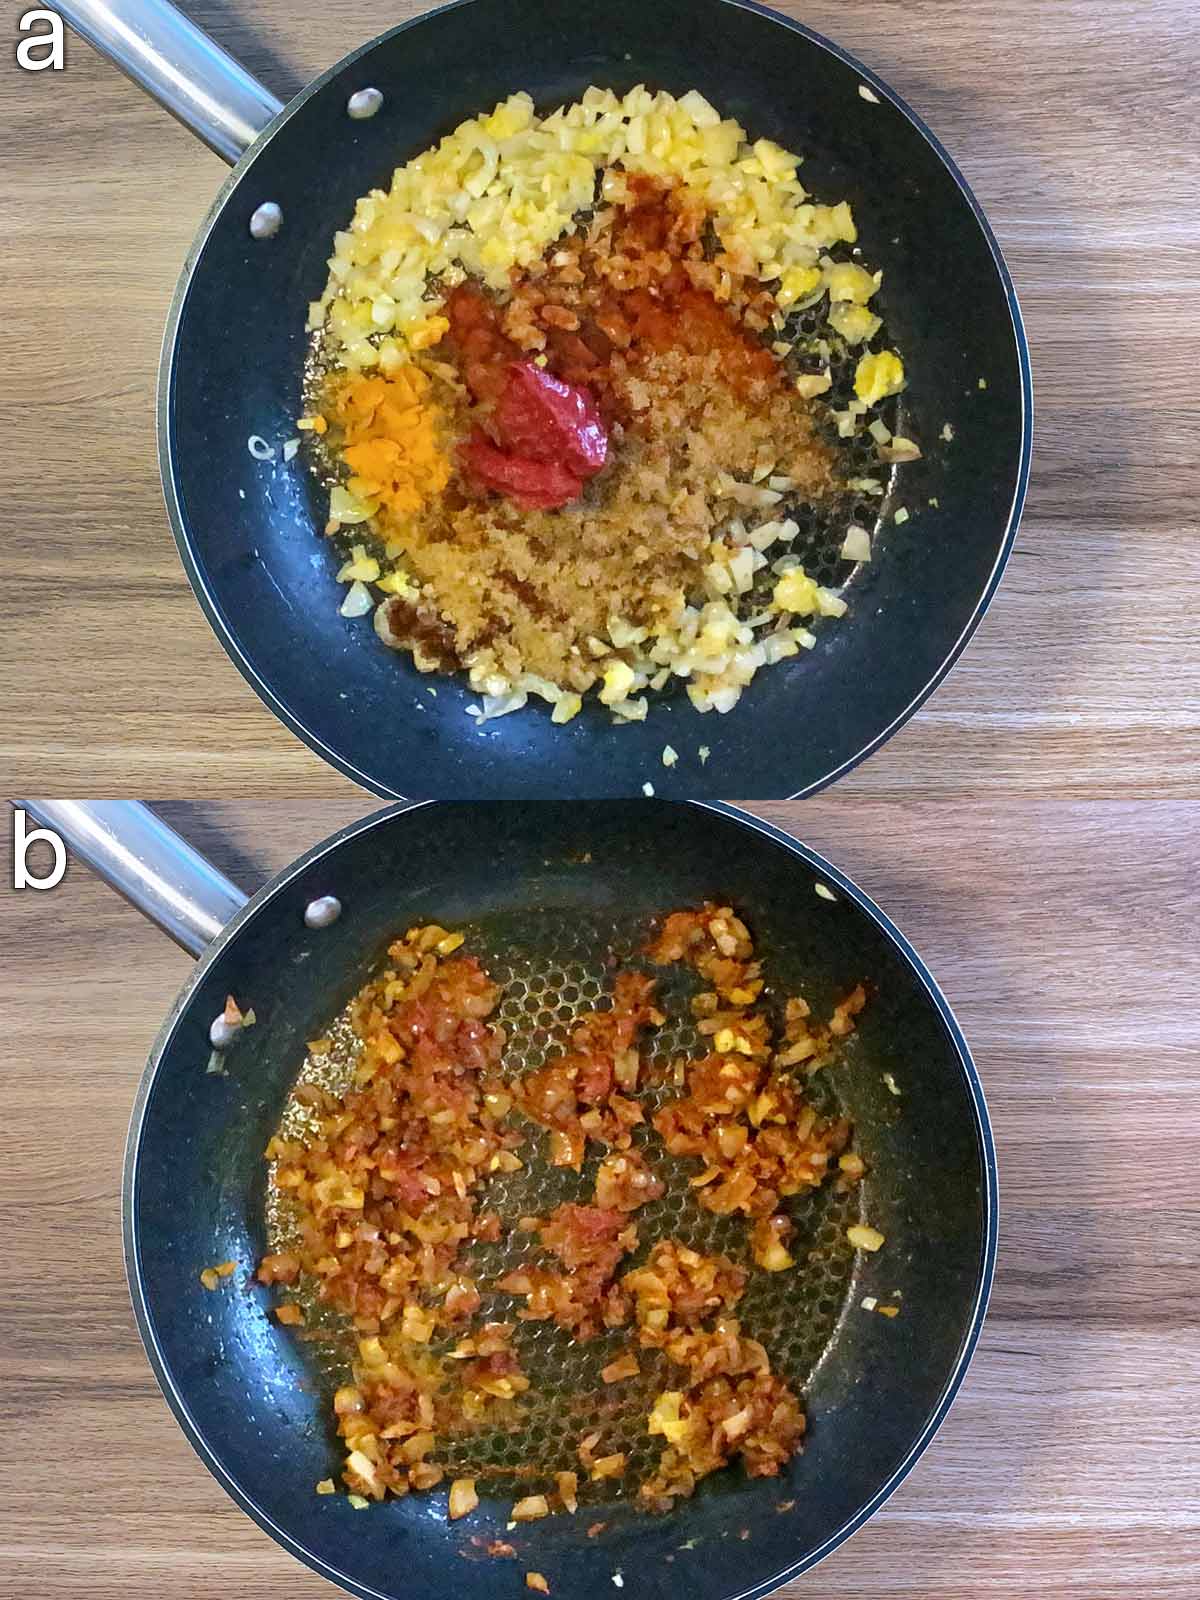 Before and after mixing shot of the tomato puree and spices added to the pan.